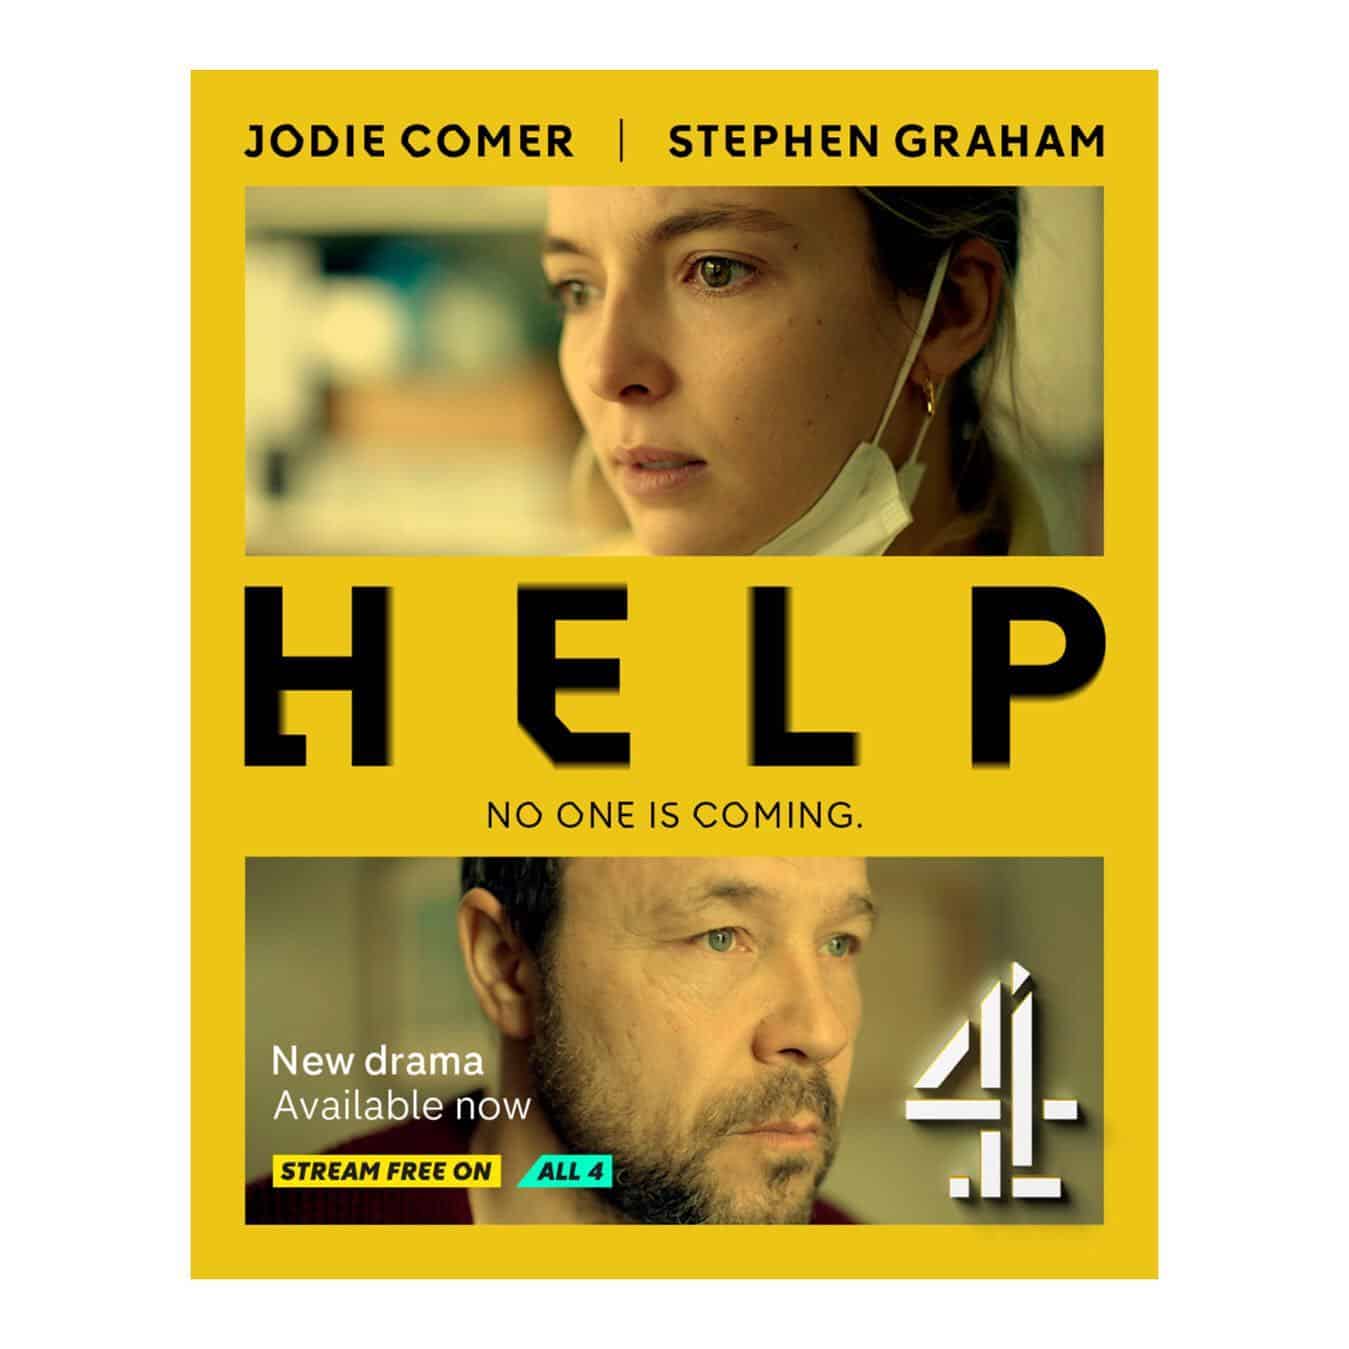 HELP featuring airs tonight on @channel4 at 9pm 
.
.
.
.
.
.